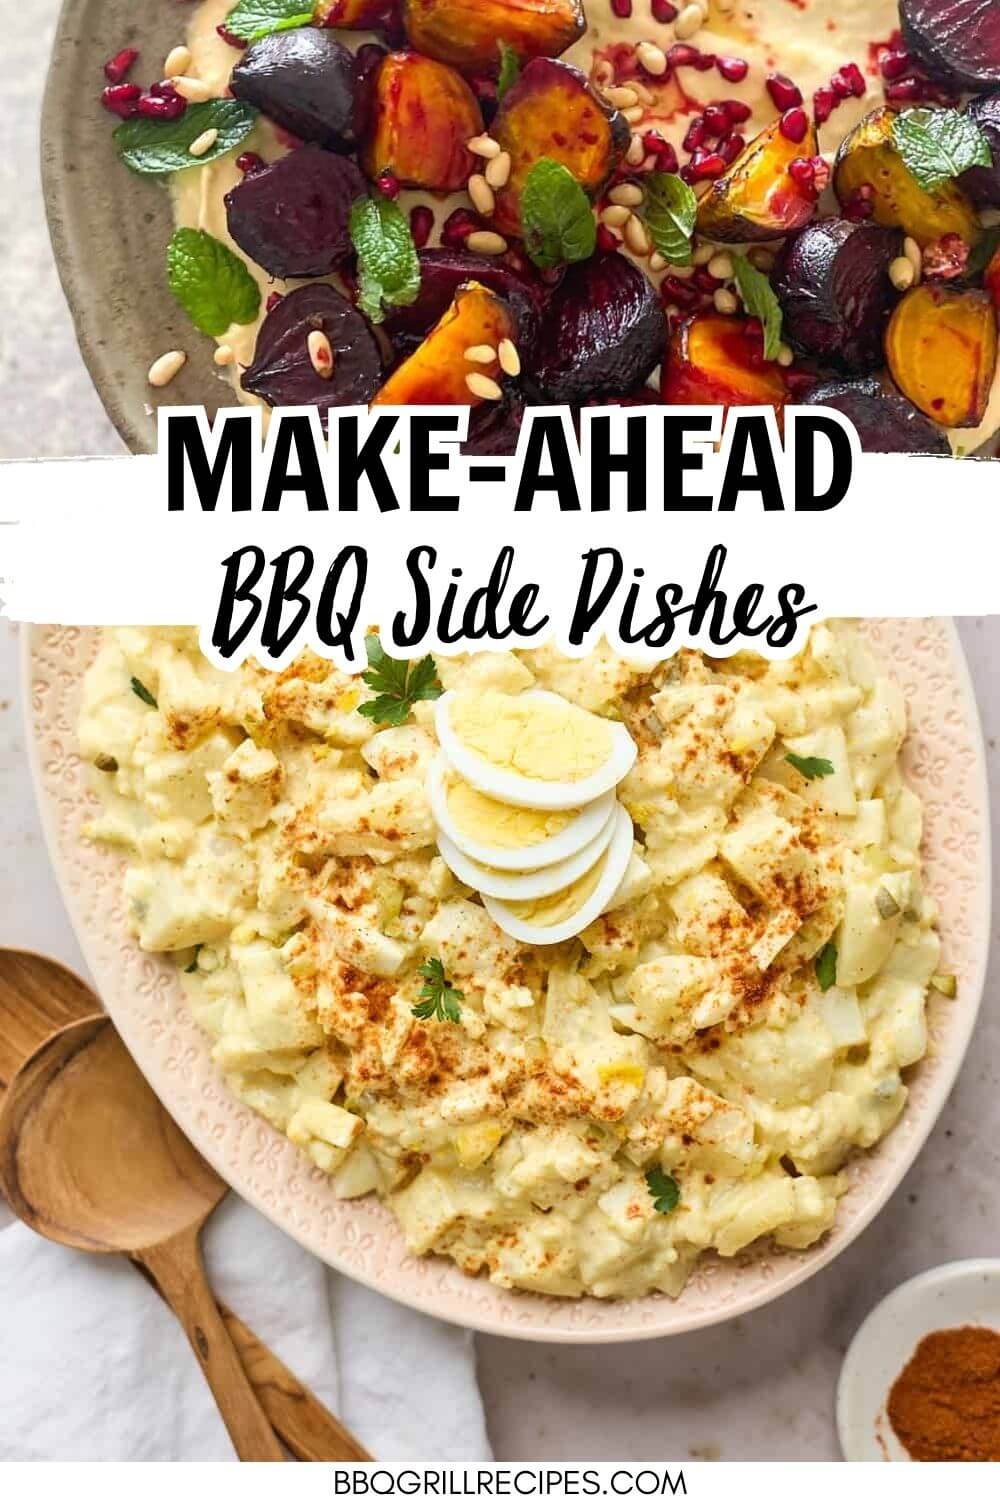 Pinterest image - best make ahead side dishes for bbq